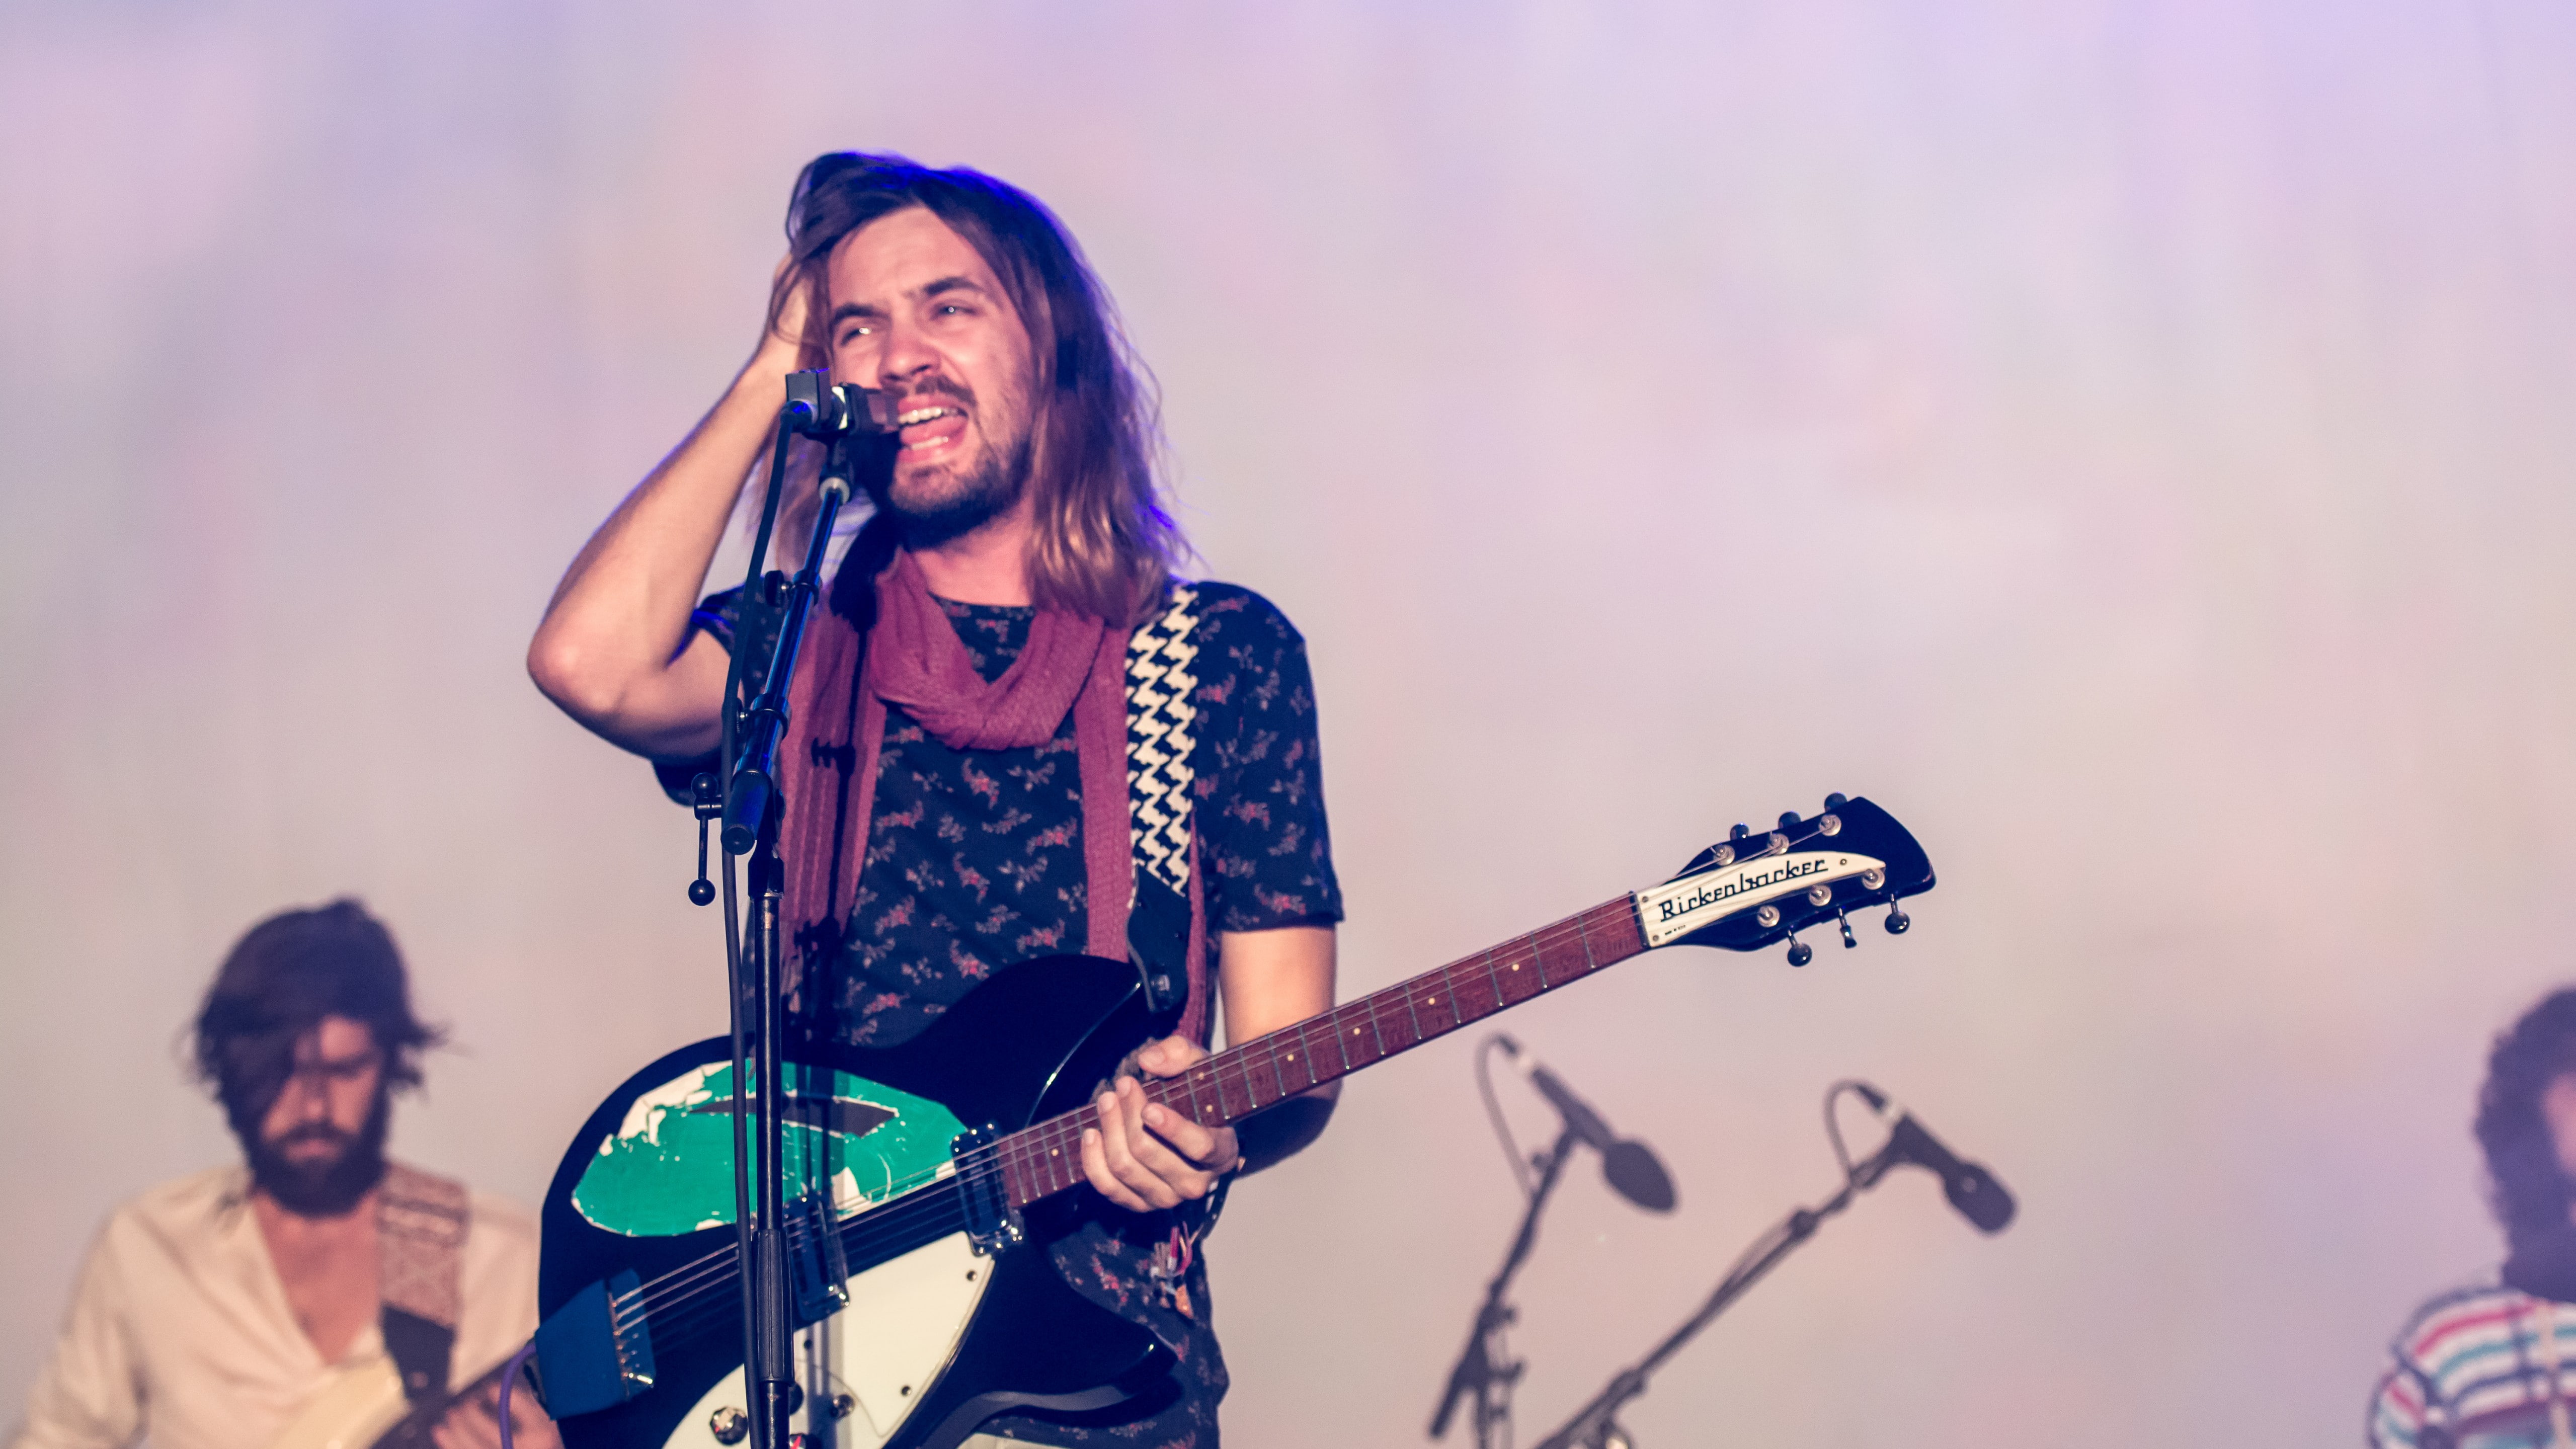 man wearing black t-shirt white holding guitar, Tame Impala, Top music artist and bands